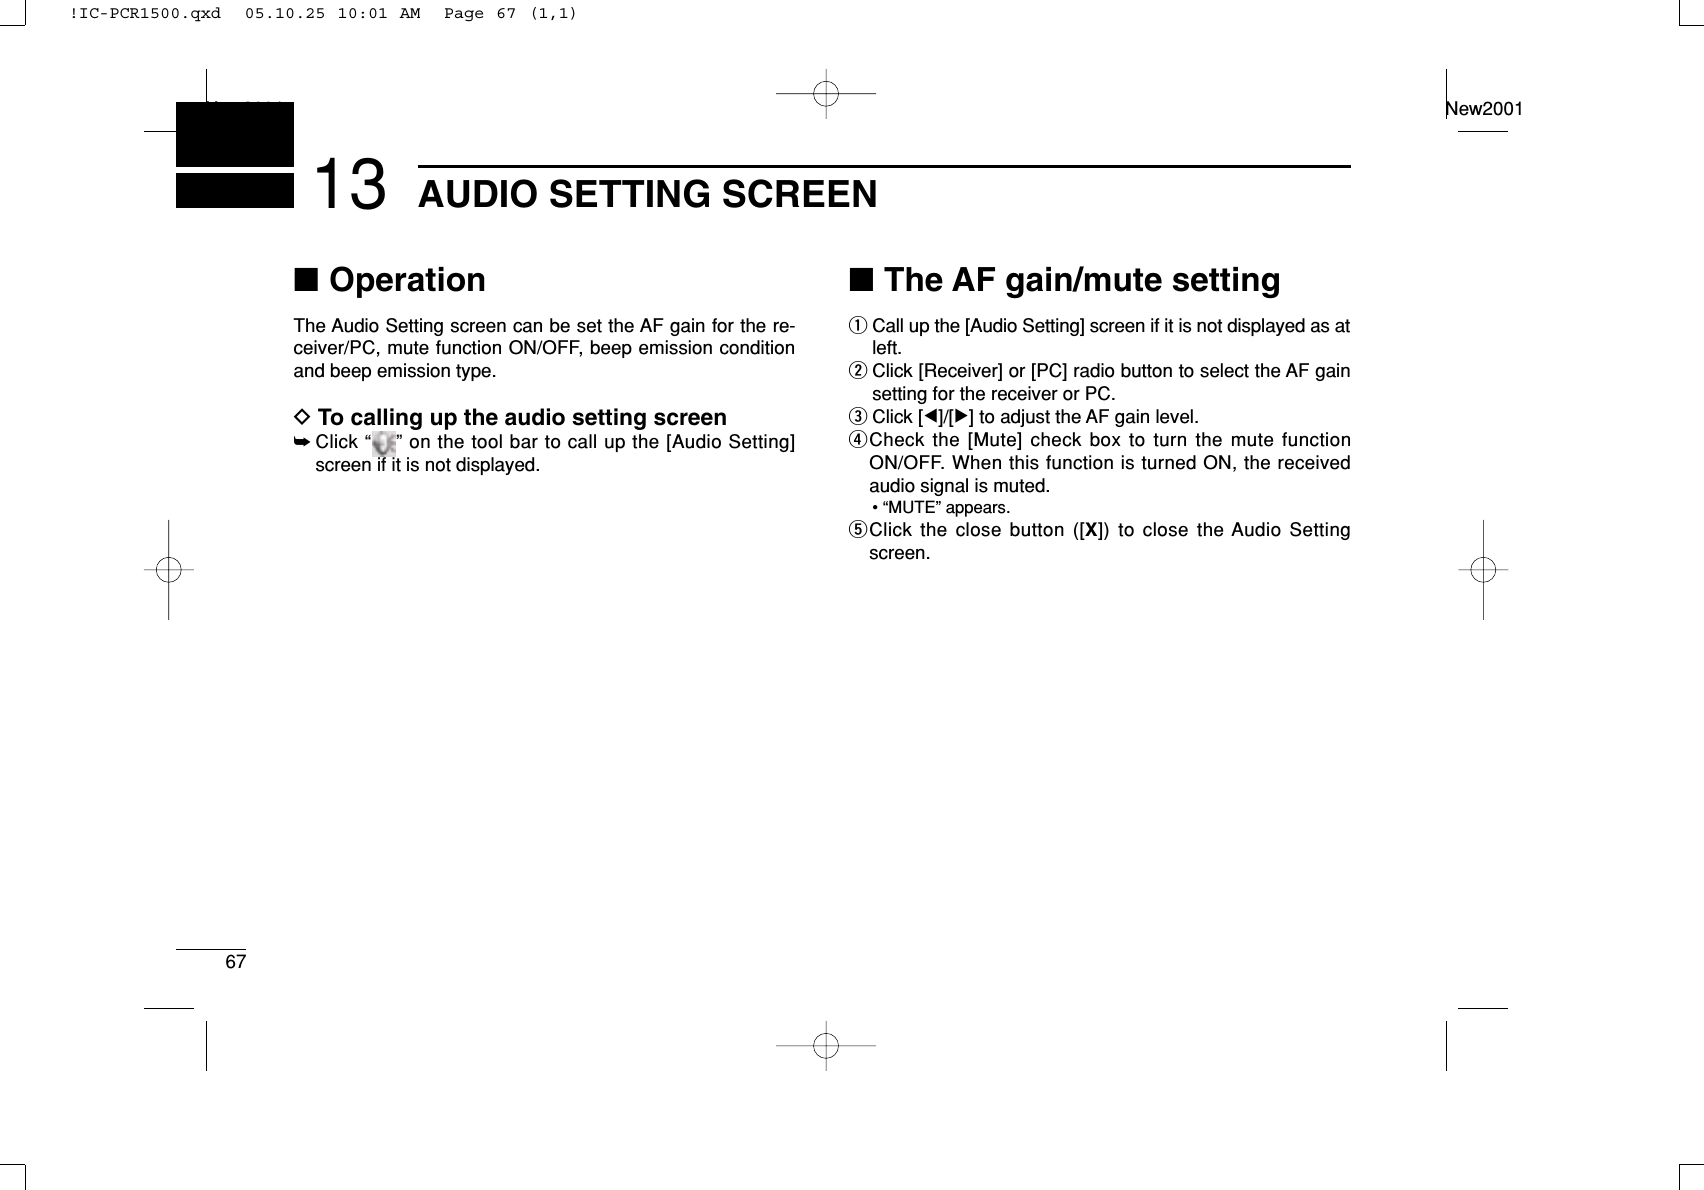 67AUDIO SETTING SCREENNew2001New200113■OperationThe Audio Setting screen can be set the AF gain for the re-ceiver/PC, mute function ON/OFF, beep emission conditionand beep emission type.DTo calling up the audio setting screen➥Click “ ” on the tool bar to call up the [Audio Setting]screen if it is not displayed.■The AF gain/mute settingqCall up the [Audio Setting] screen if it is not displayed as atleft.wClick [Receiver] or [PC] radio button to select the AF gainsetting for the receiver or PC.eClick [Ω]/[≈] to adjust the AF gain level.rCheck the [Mute] check box to turn the mute functionON/OFF. When this function is turned ON, the receivedaudio signal is muted.• “MUTE” appears.tClick the close button ([X]) to close the Audio Settingscreen.!IC-PCR1500.qxd  05.10.25 10:01 AM  Page 67 (1,1)